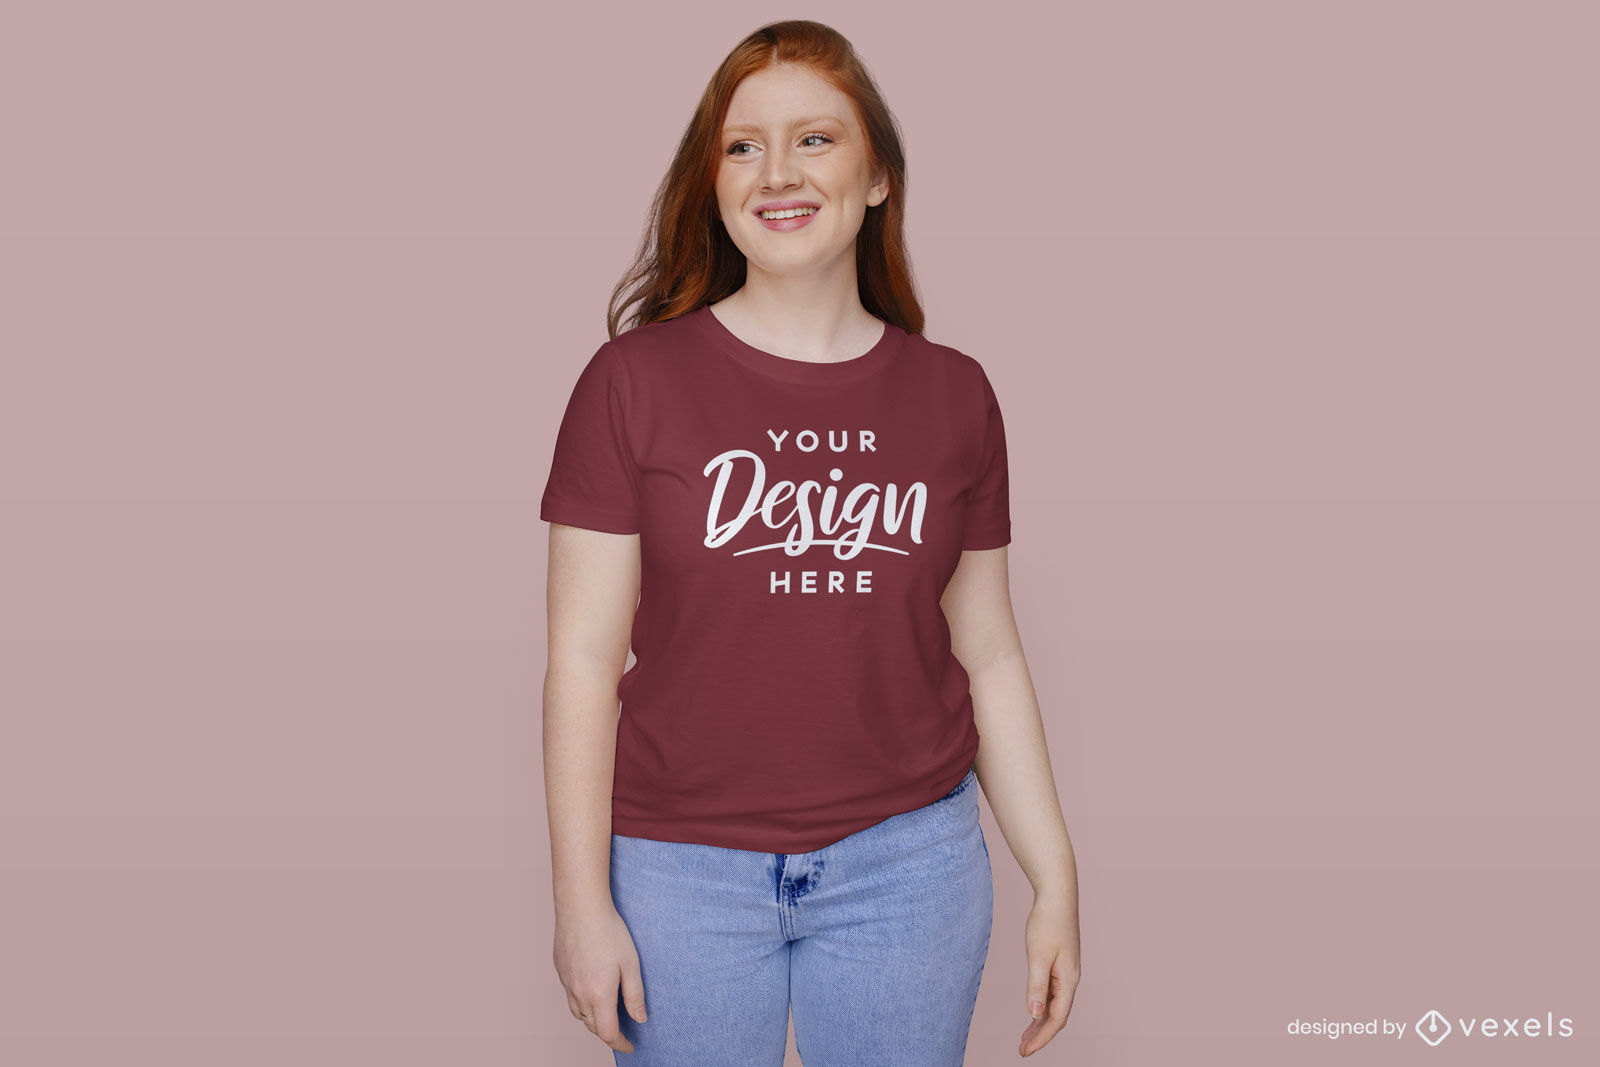 Red t-shirt girl mockup in pink background